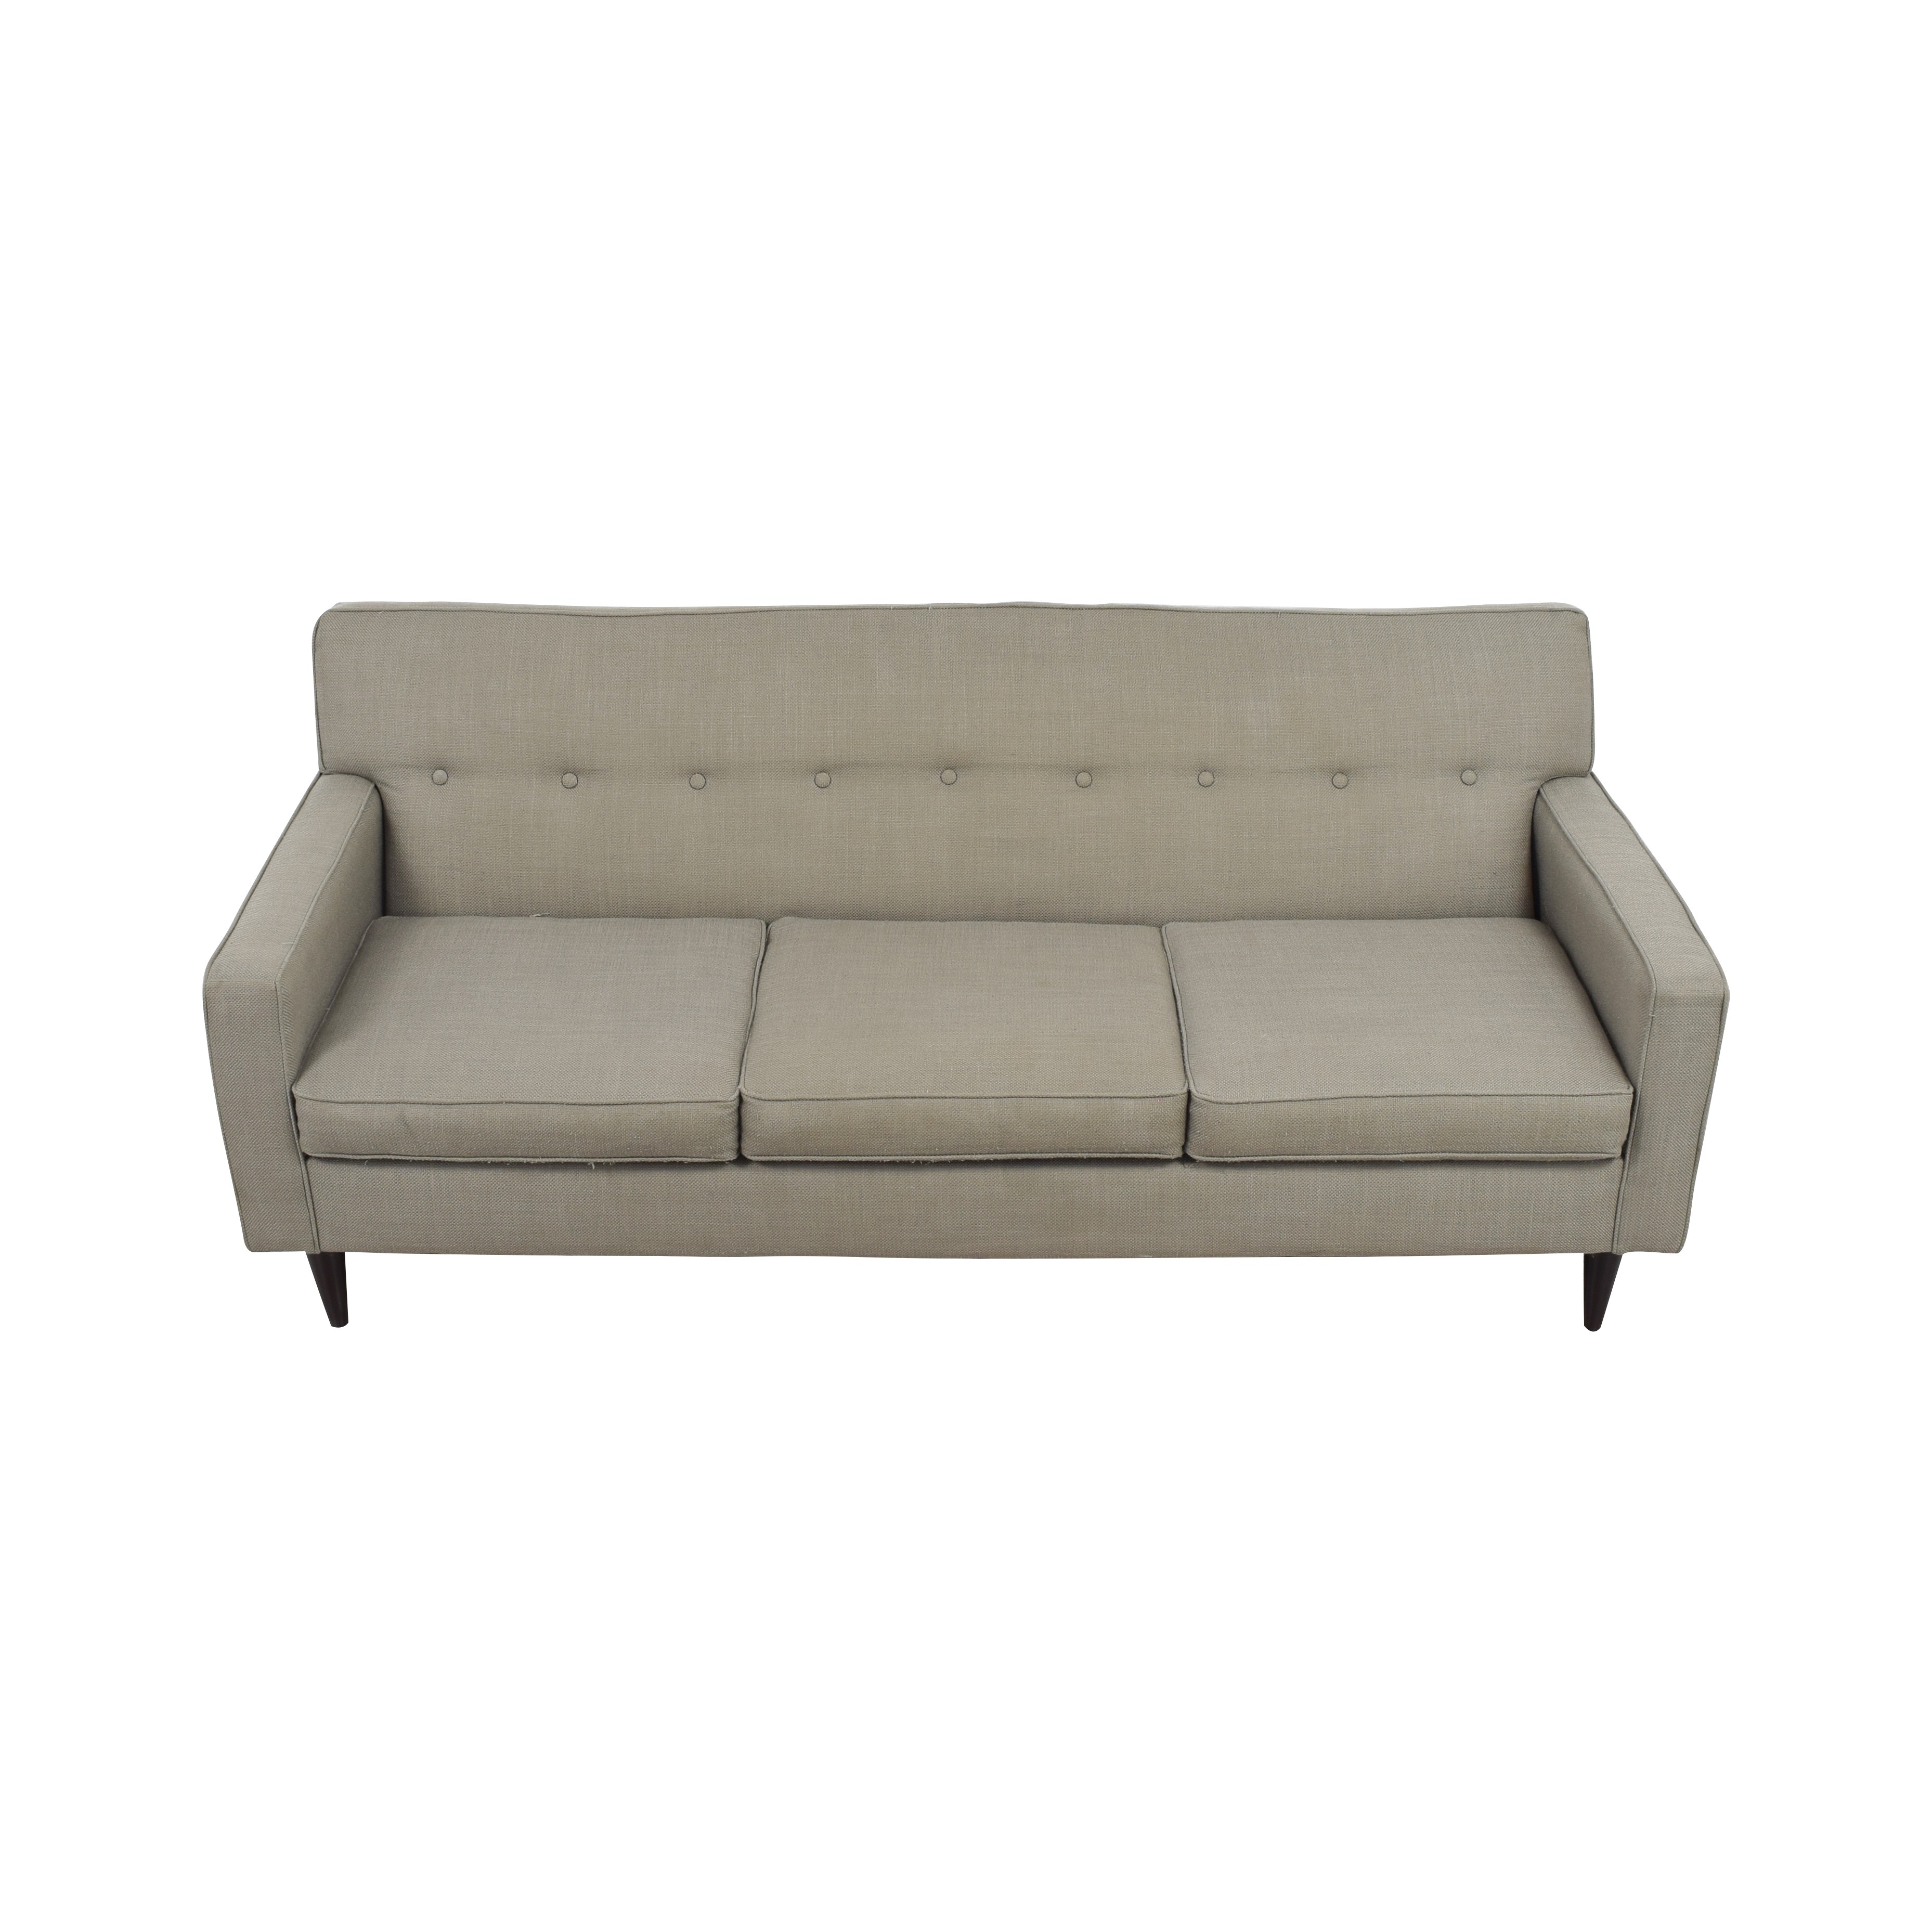 enticing macys chloe sofa picture inspirations tufted sofas at five favorites sixs home design full size